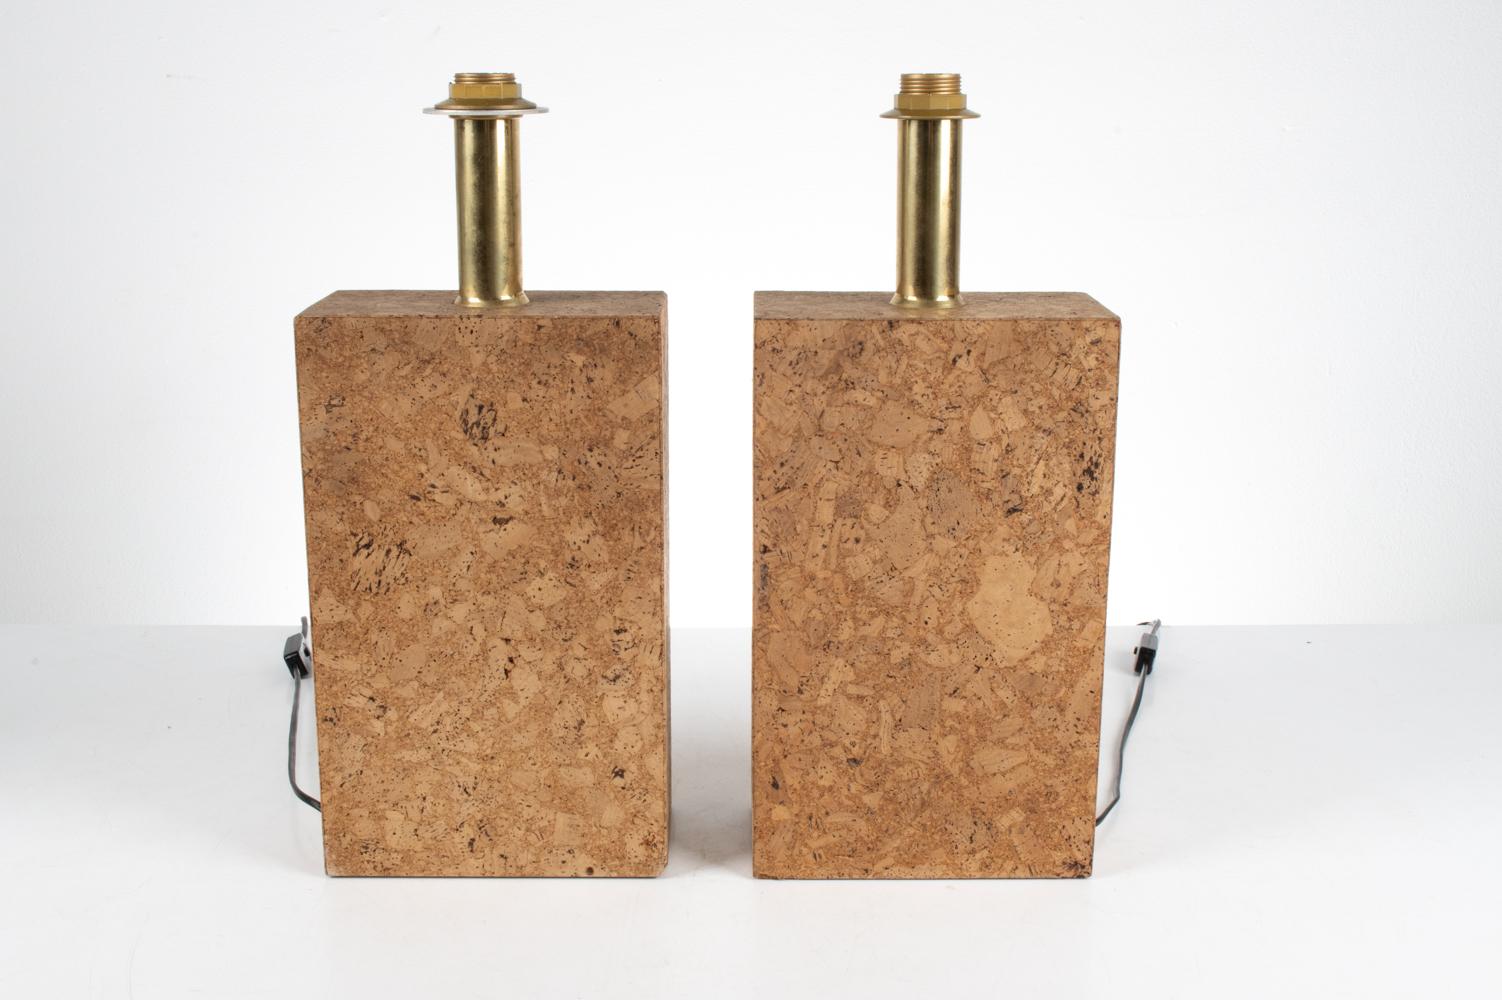 Swiss Pair of Cork Monolith Table Lamps in the Stye of Ingo Maurer, c. 1970's For Sale